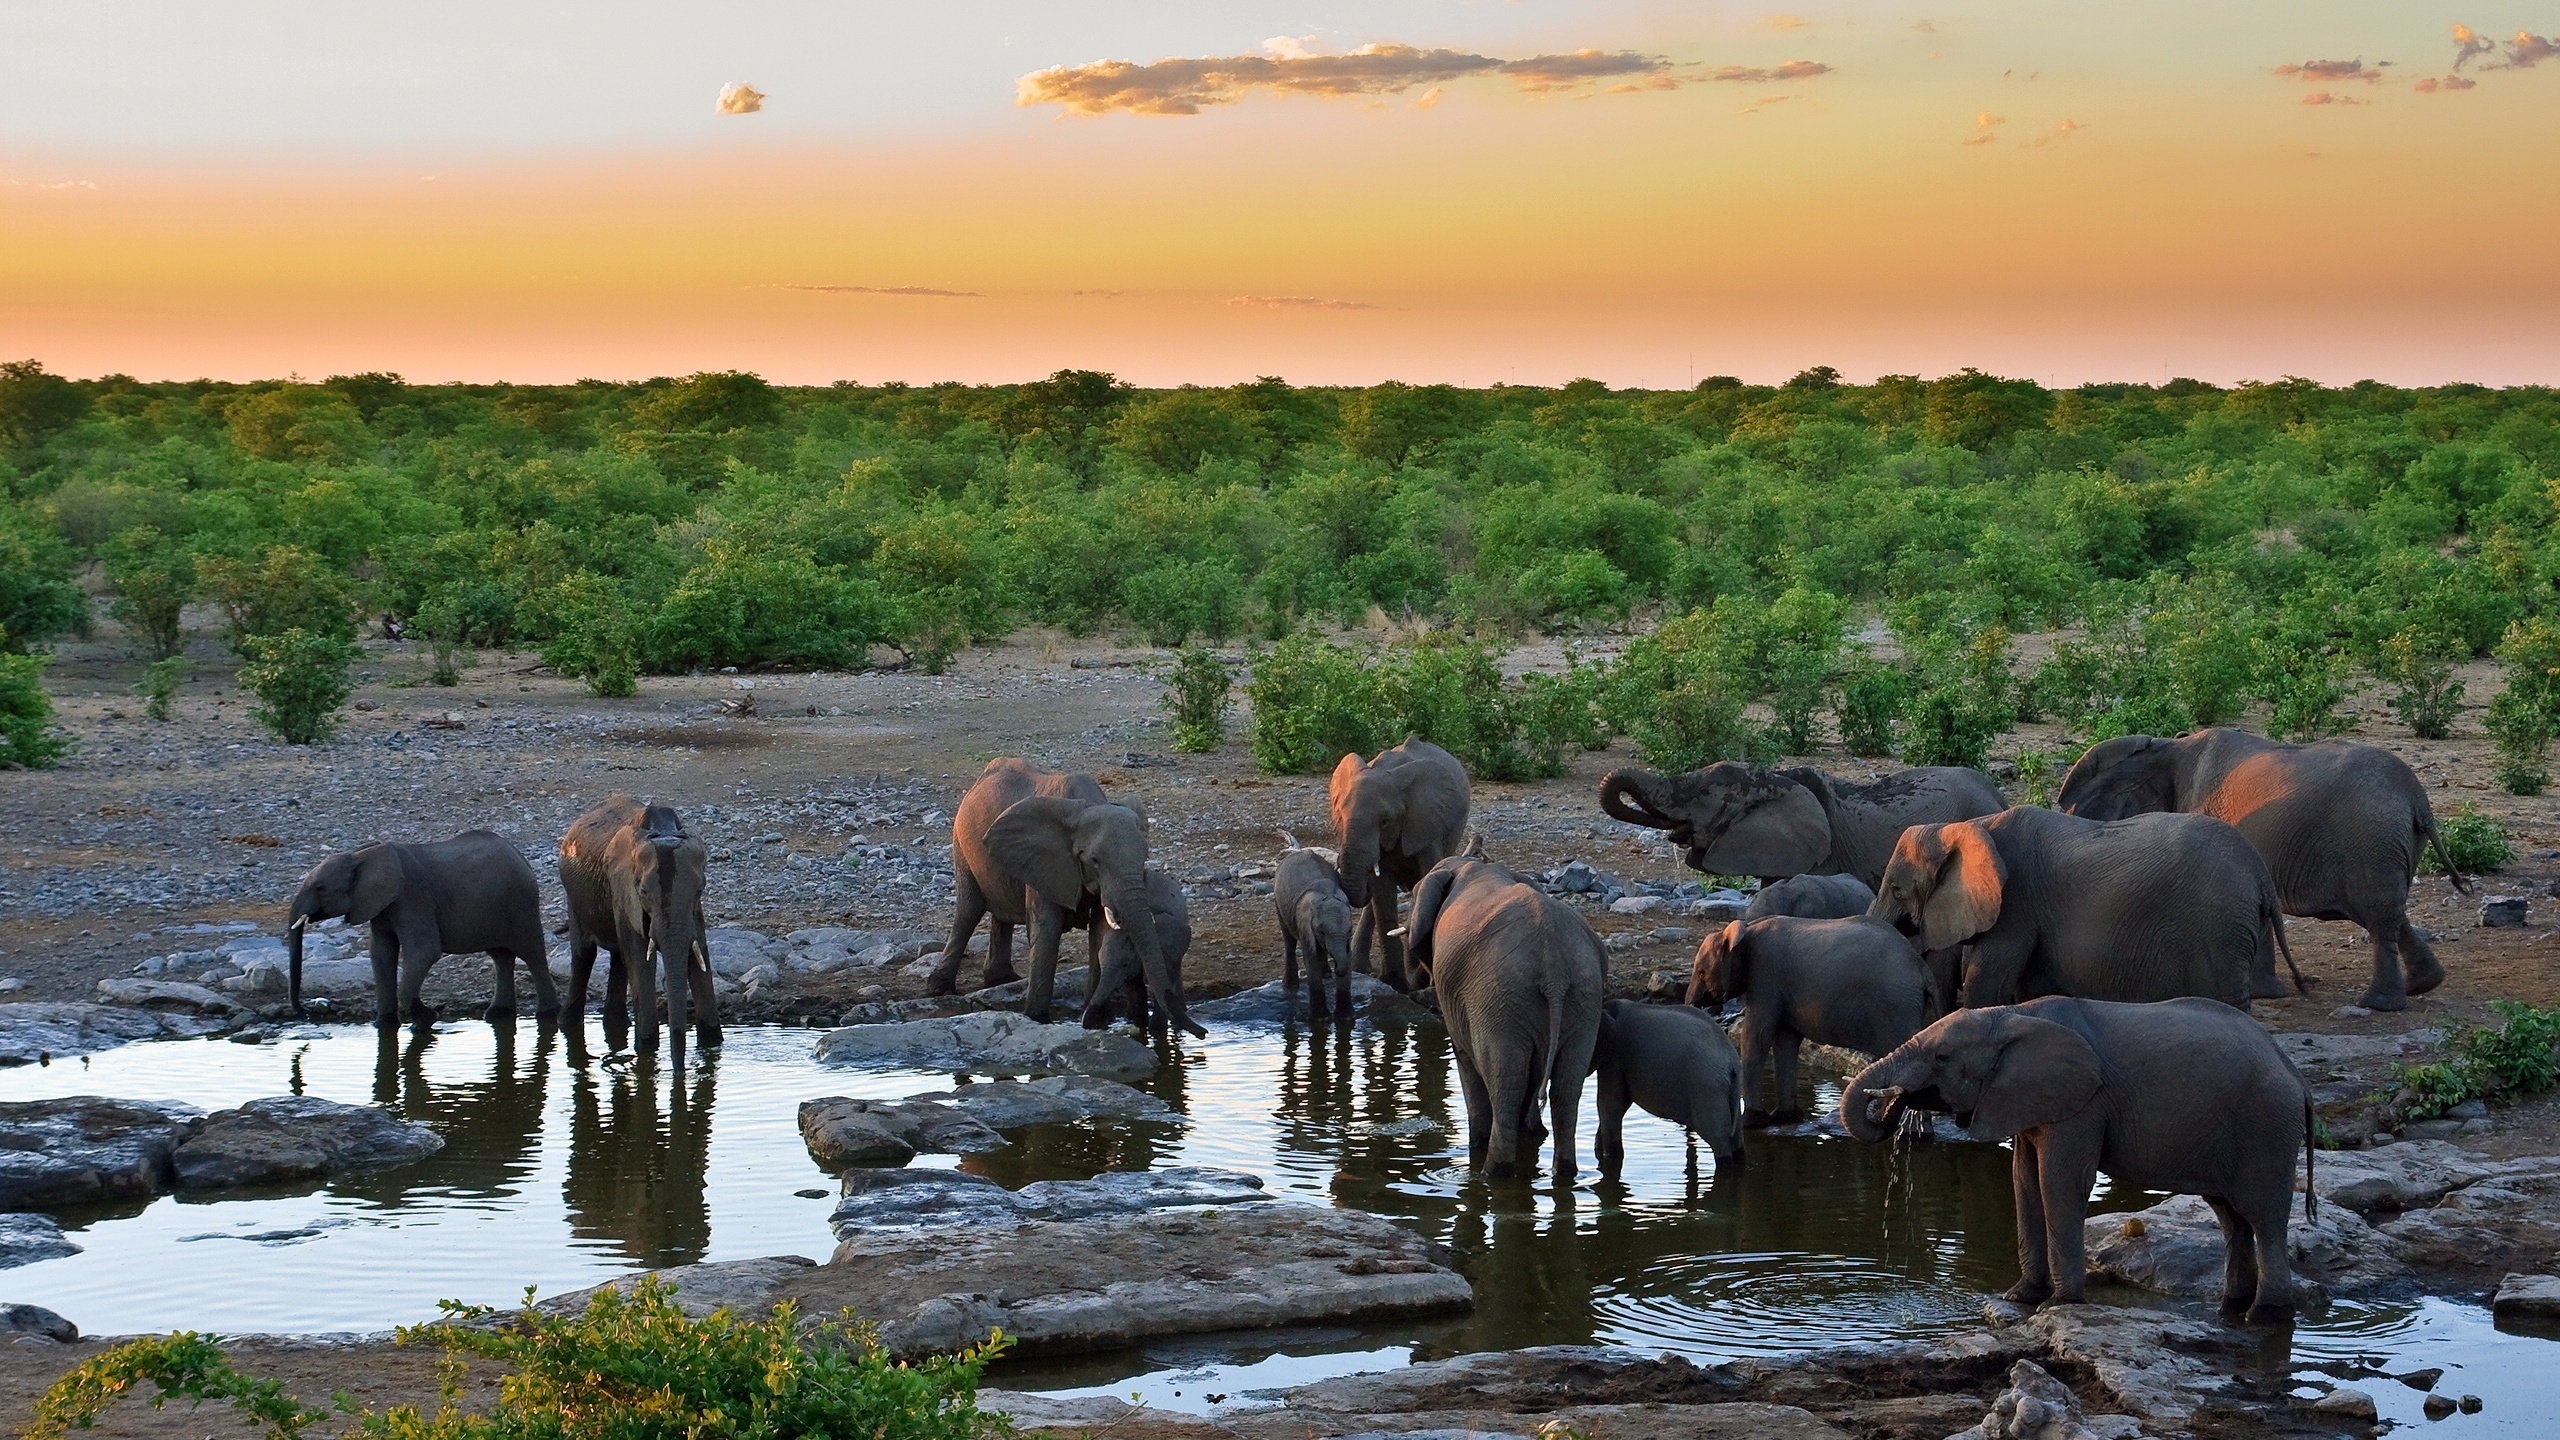 Sunset with Elephants for 2560x1440 HDTV resolution